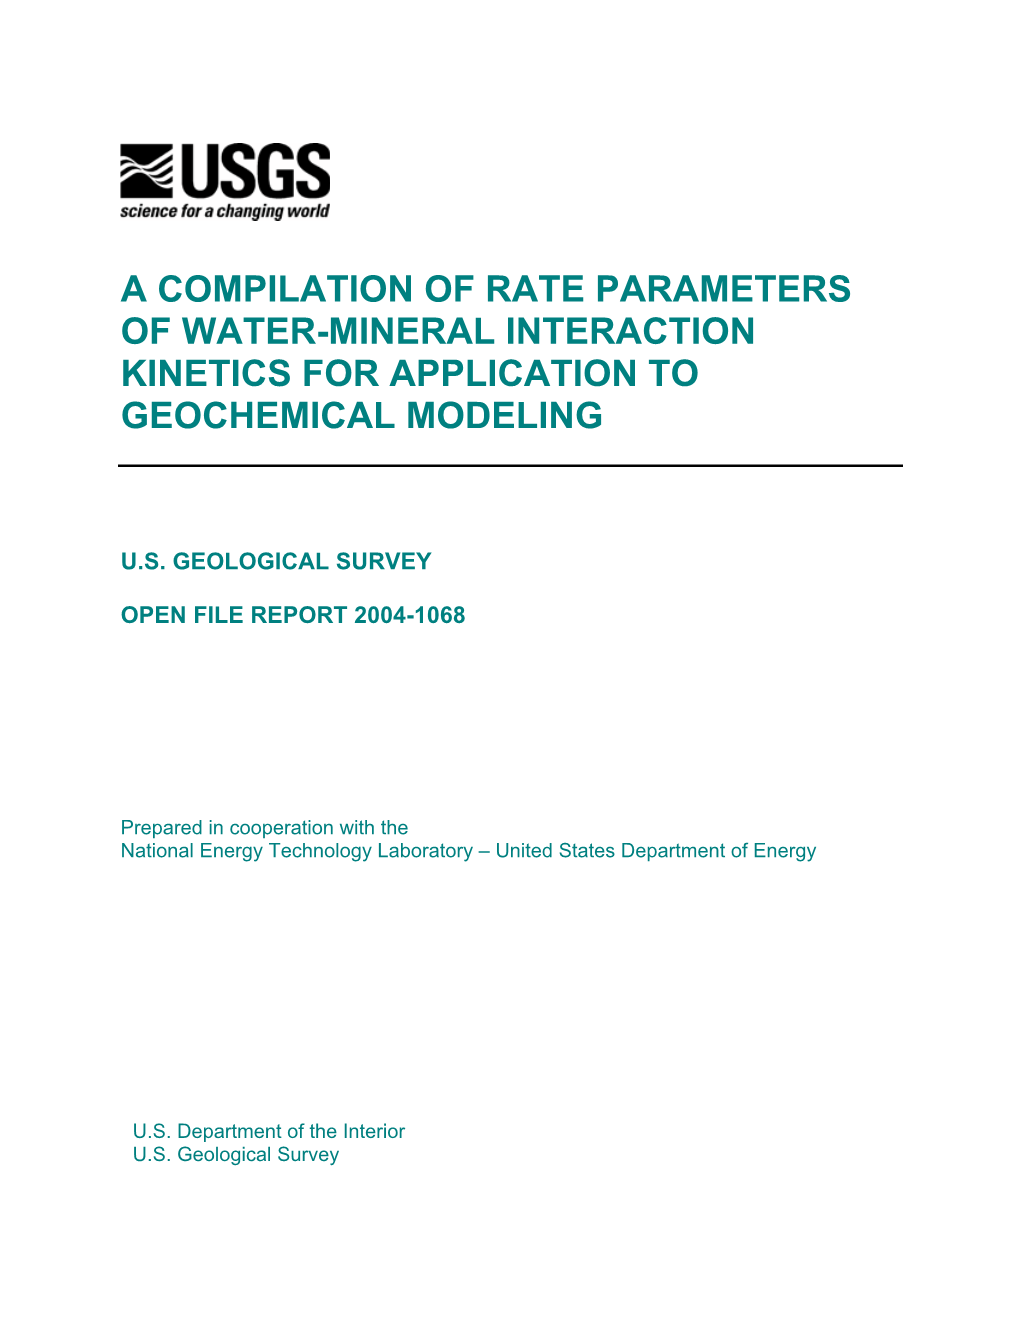 A Compilation of Rate Parameters of Water-Mineral Interaction Kinetics for Application to Geochemical Modeling